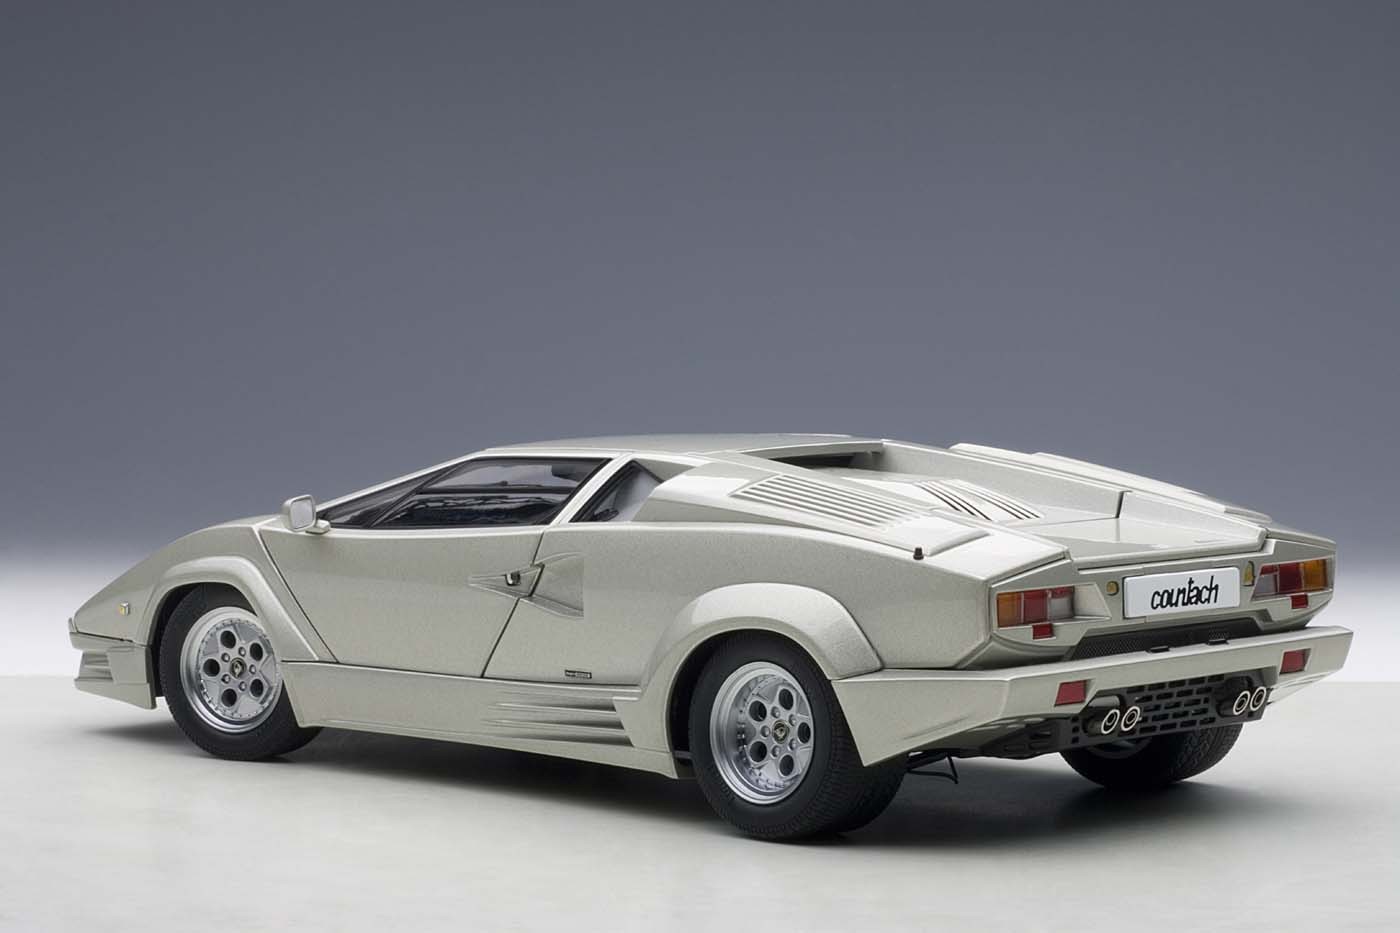 AUTOart Highly detailed die-cast model Last 25th Anniversary Lamborghini  Countach Silver AUTOart 74536 Die-Cast Scale 1:18 ezToys - Diecast Models  and Collectibles